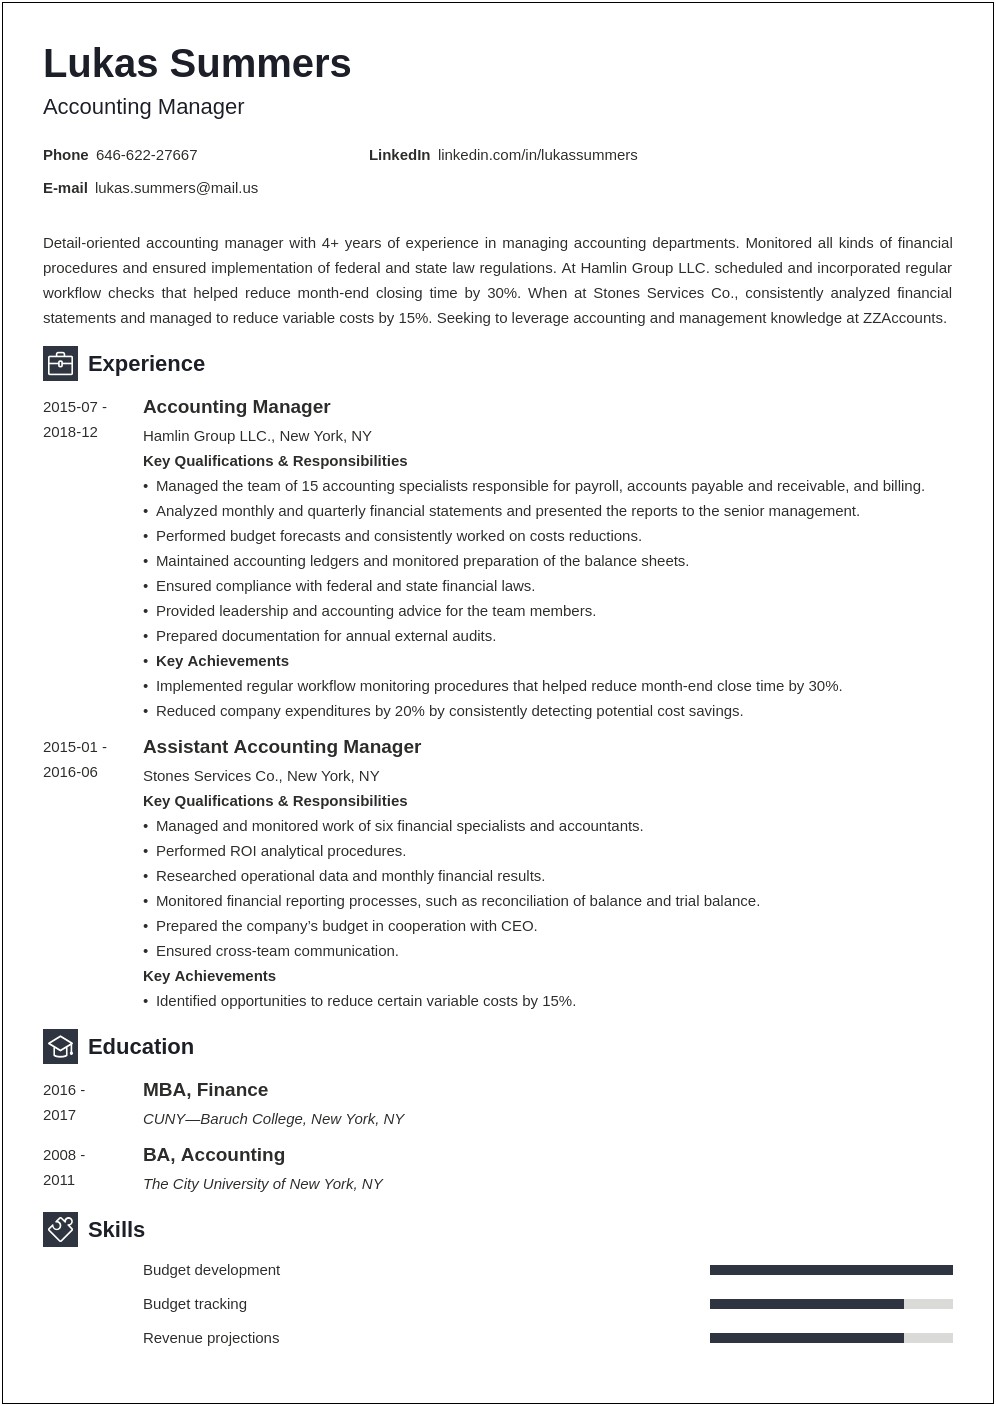 Accounting Manager Description For Resume